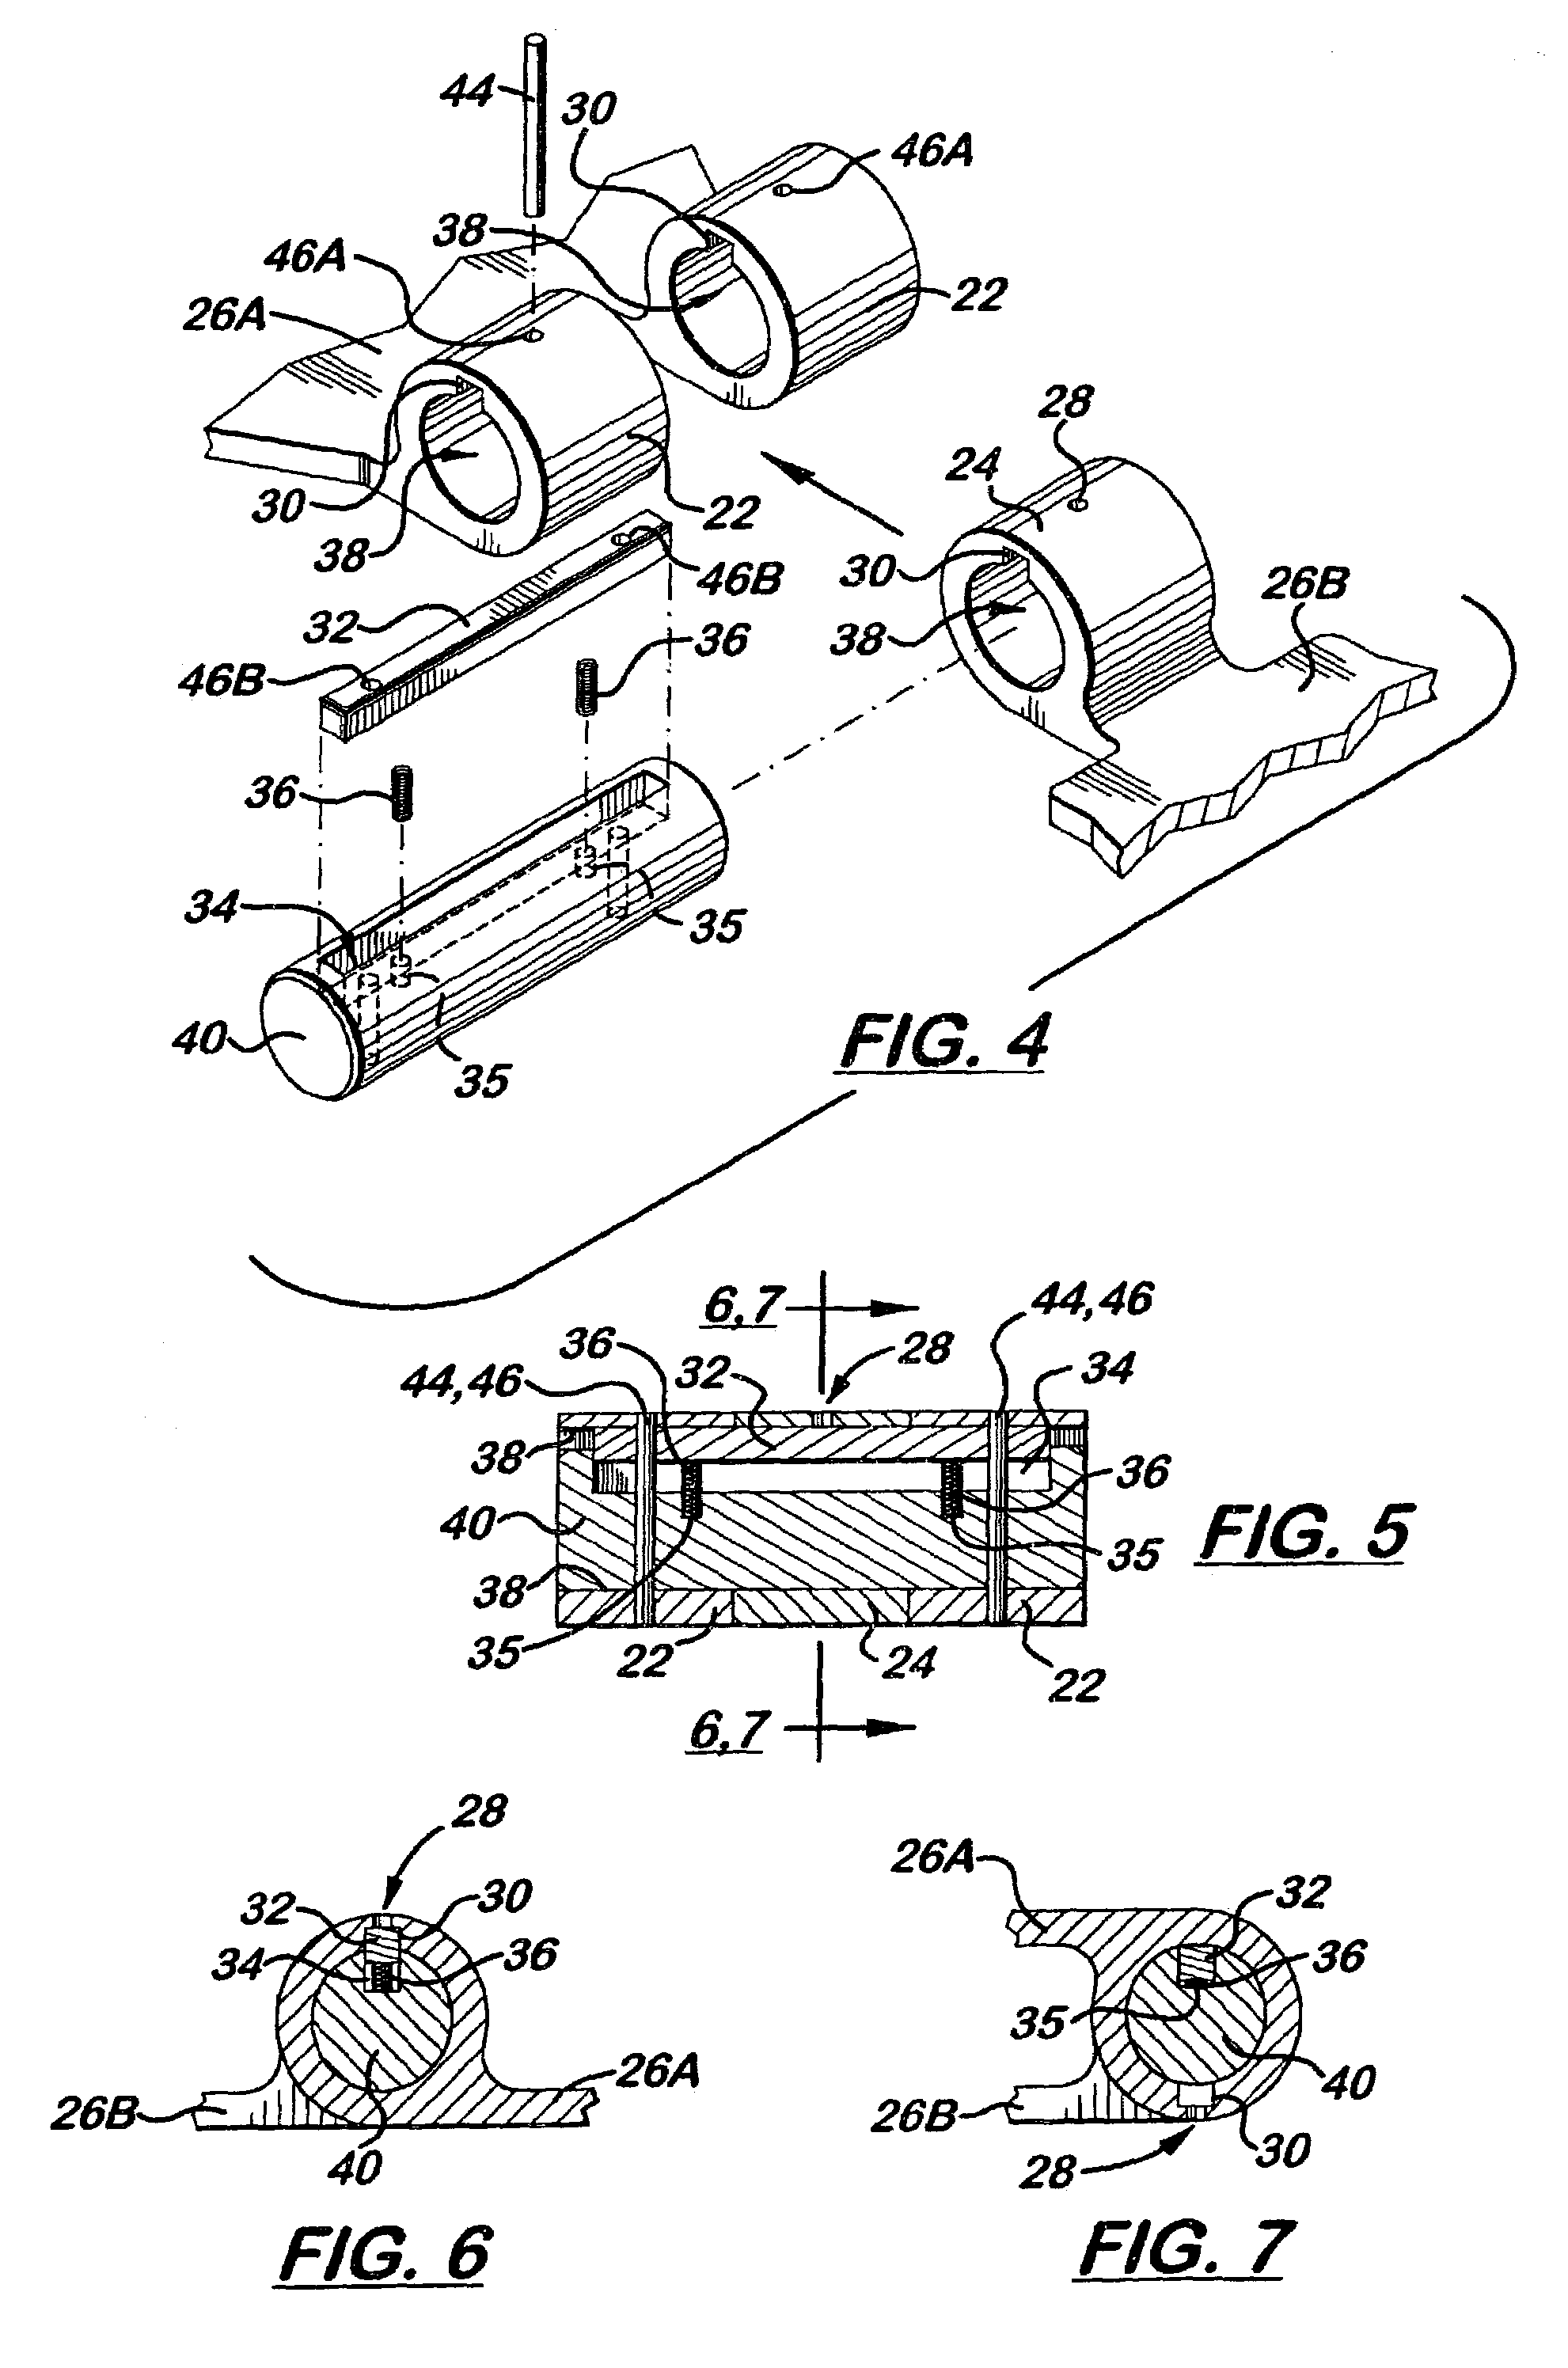 Folding tools with locking hinges